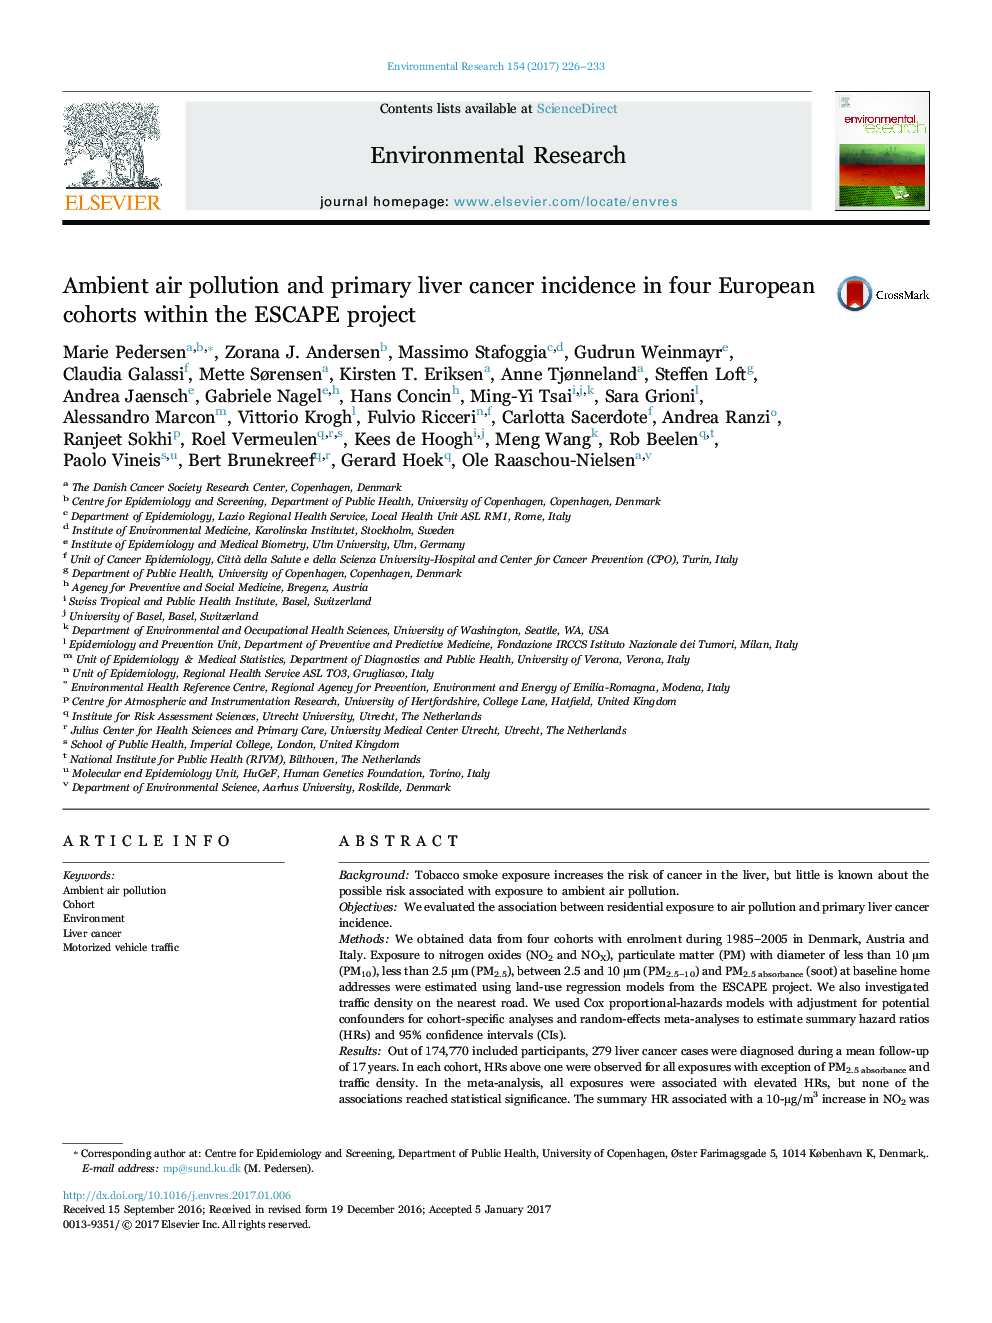 Ambient air pollution and primary liver cancer incidence in four European cohorts within the ESCAPE project